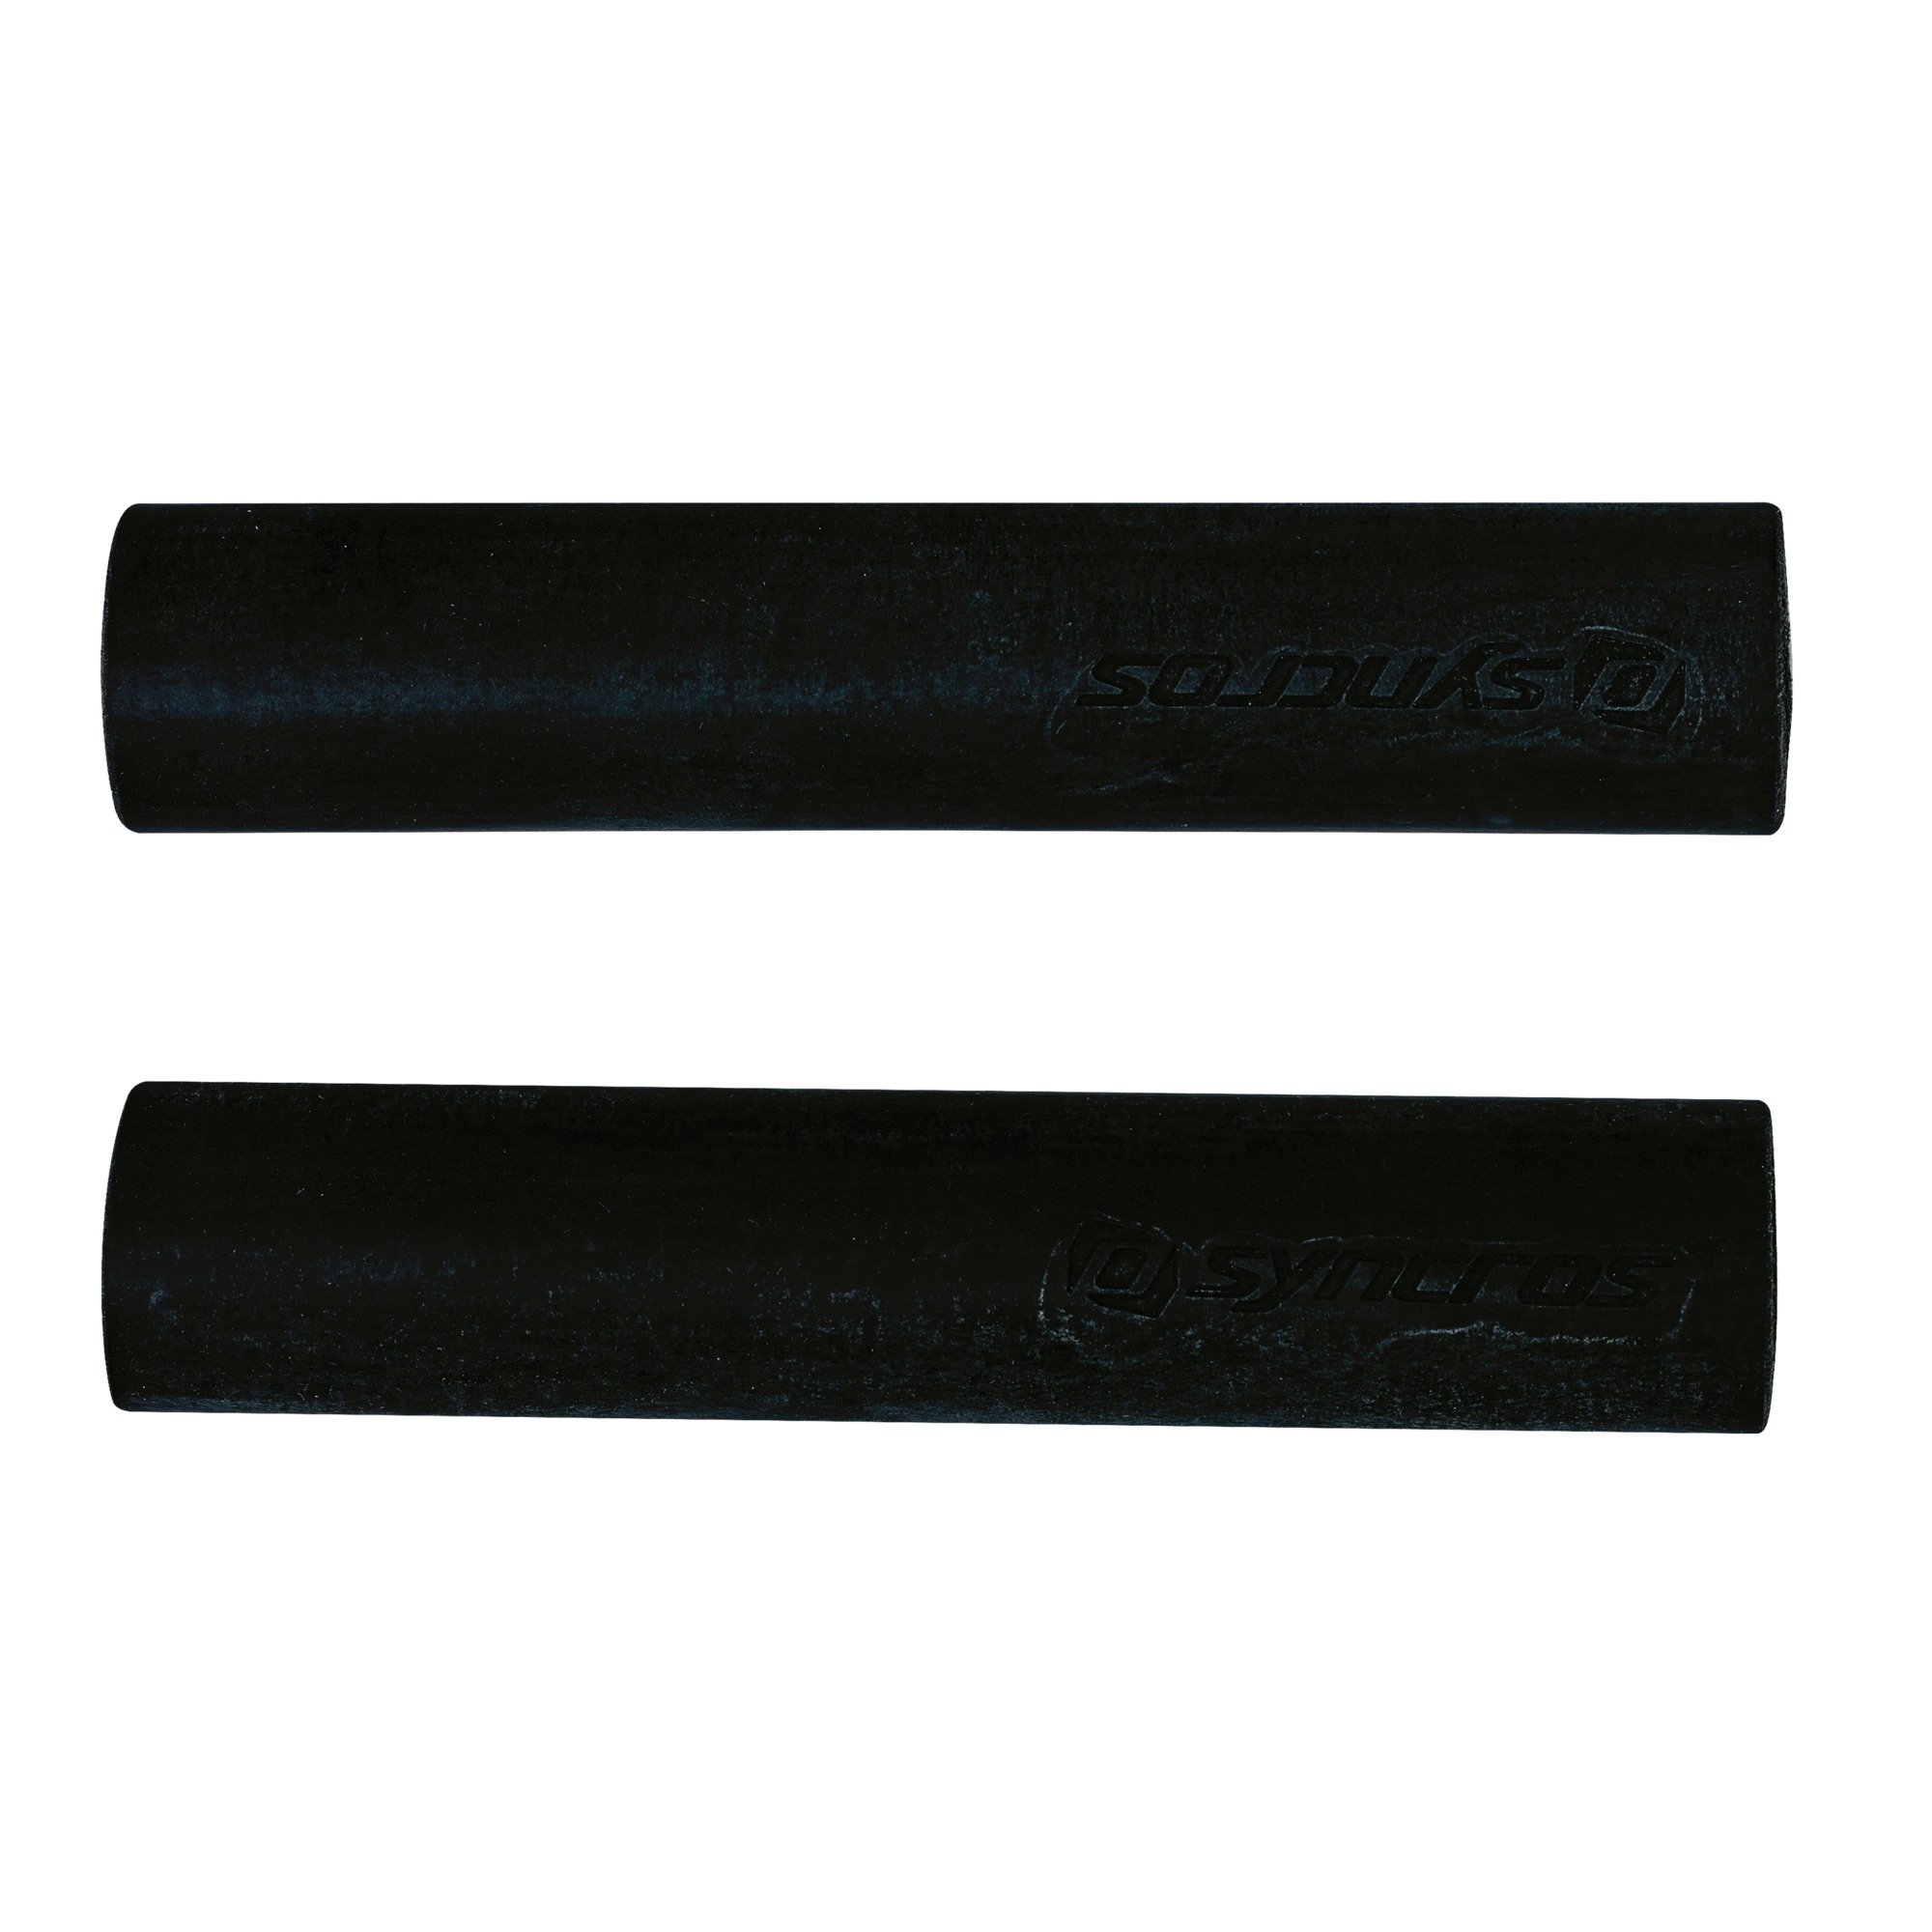 Syncros Silicone Grips Håndtag - Sort